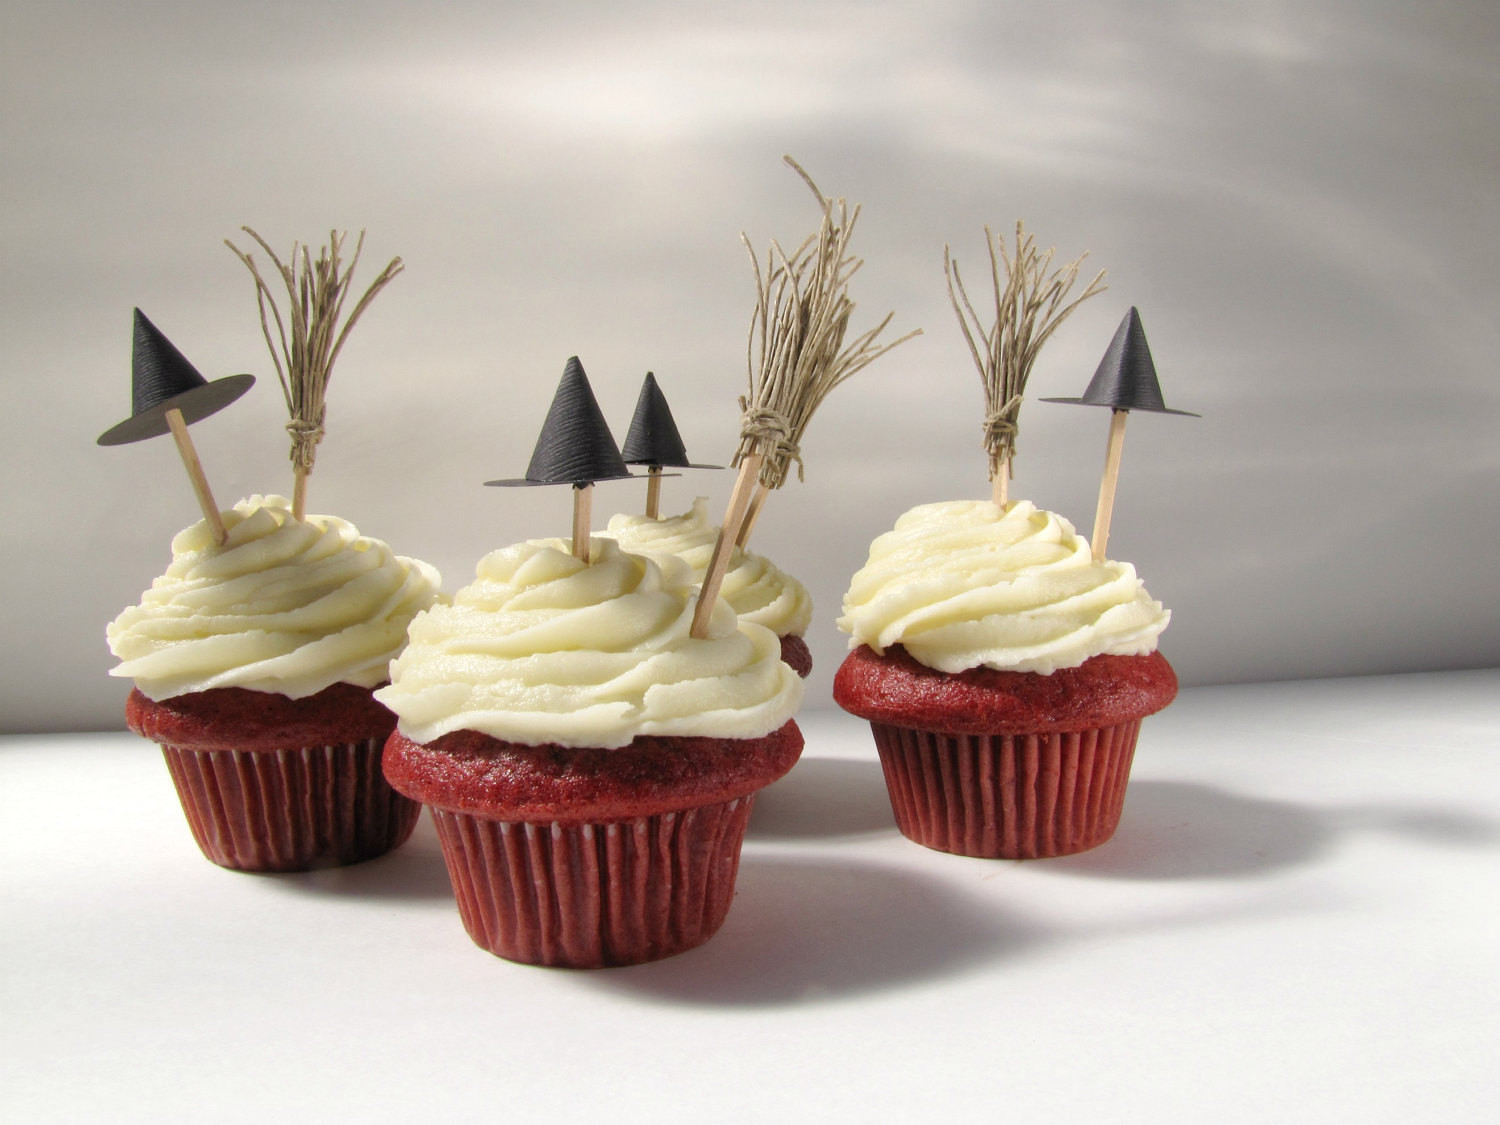 Halloween Witch Cupcakes
 Halloween Cupcake Toppers Witch hats and brooms cupcake